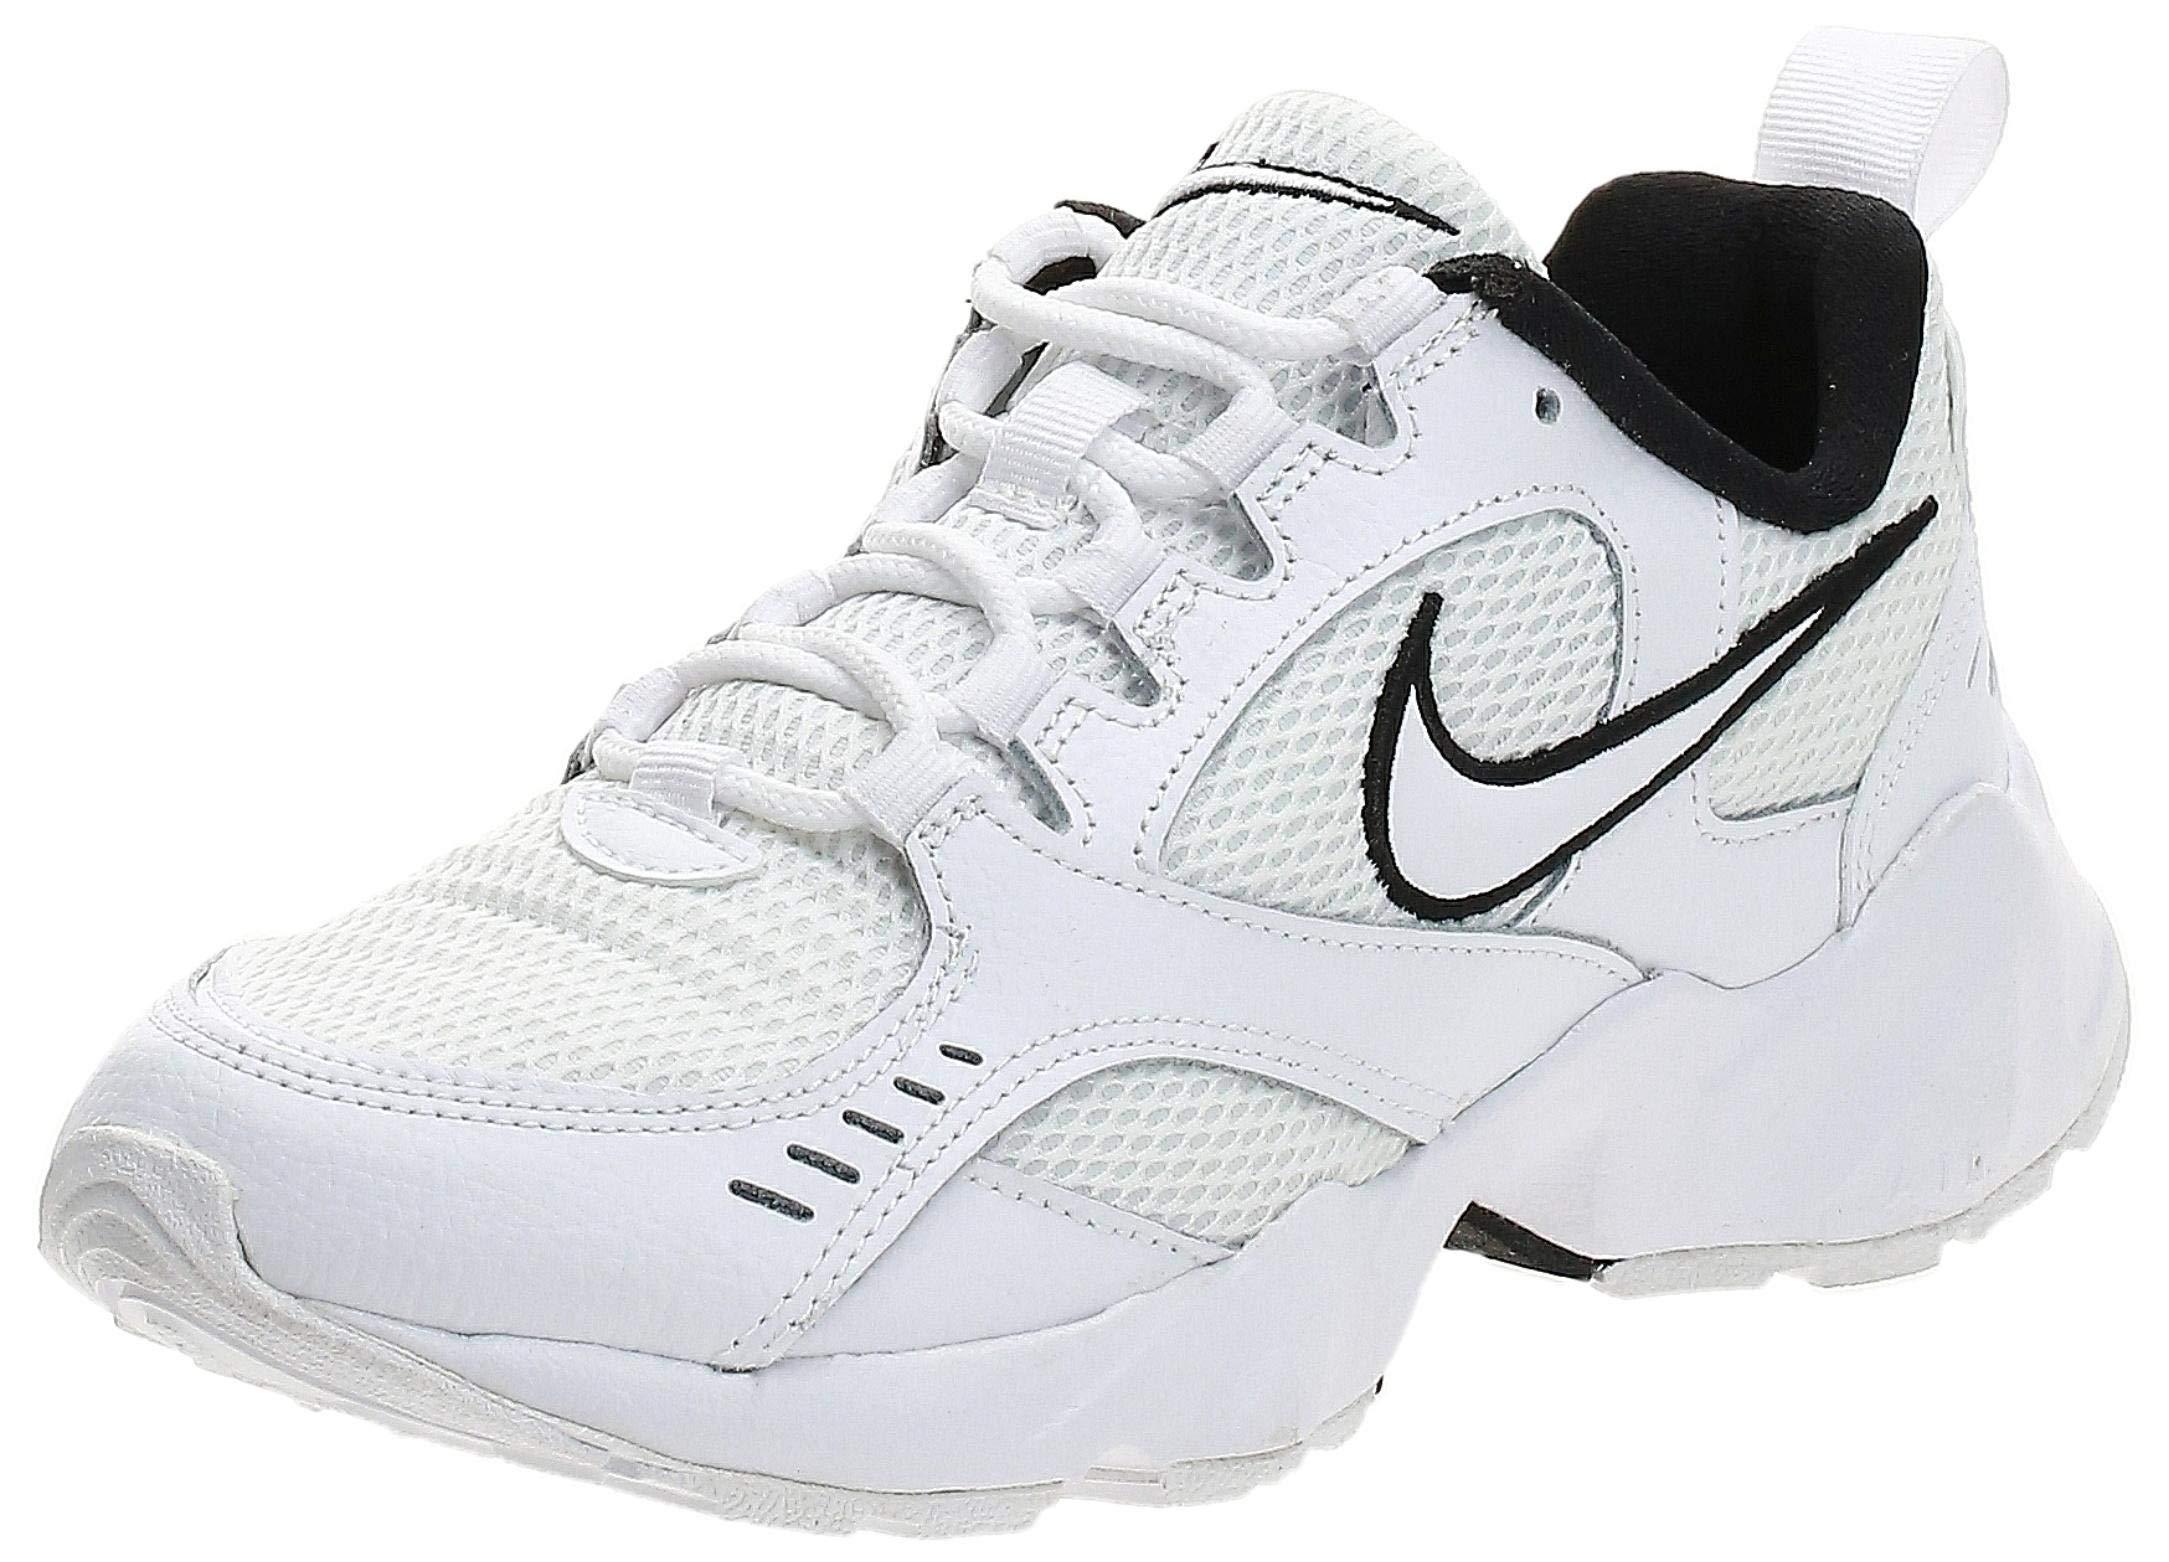 Nike Leather Air Heights in White White Black (White) - Save 56% - Lyst